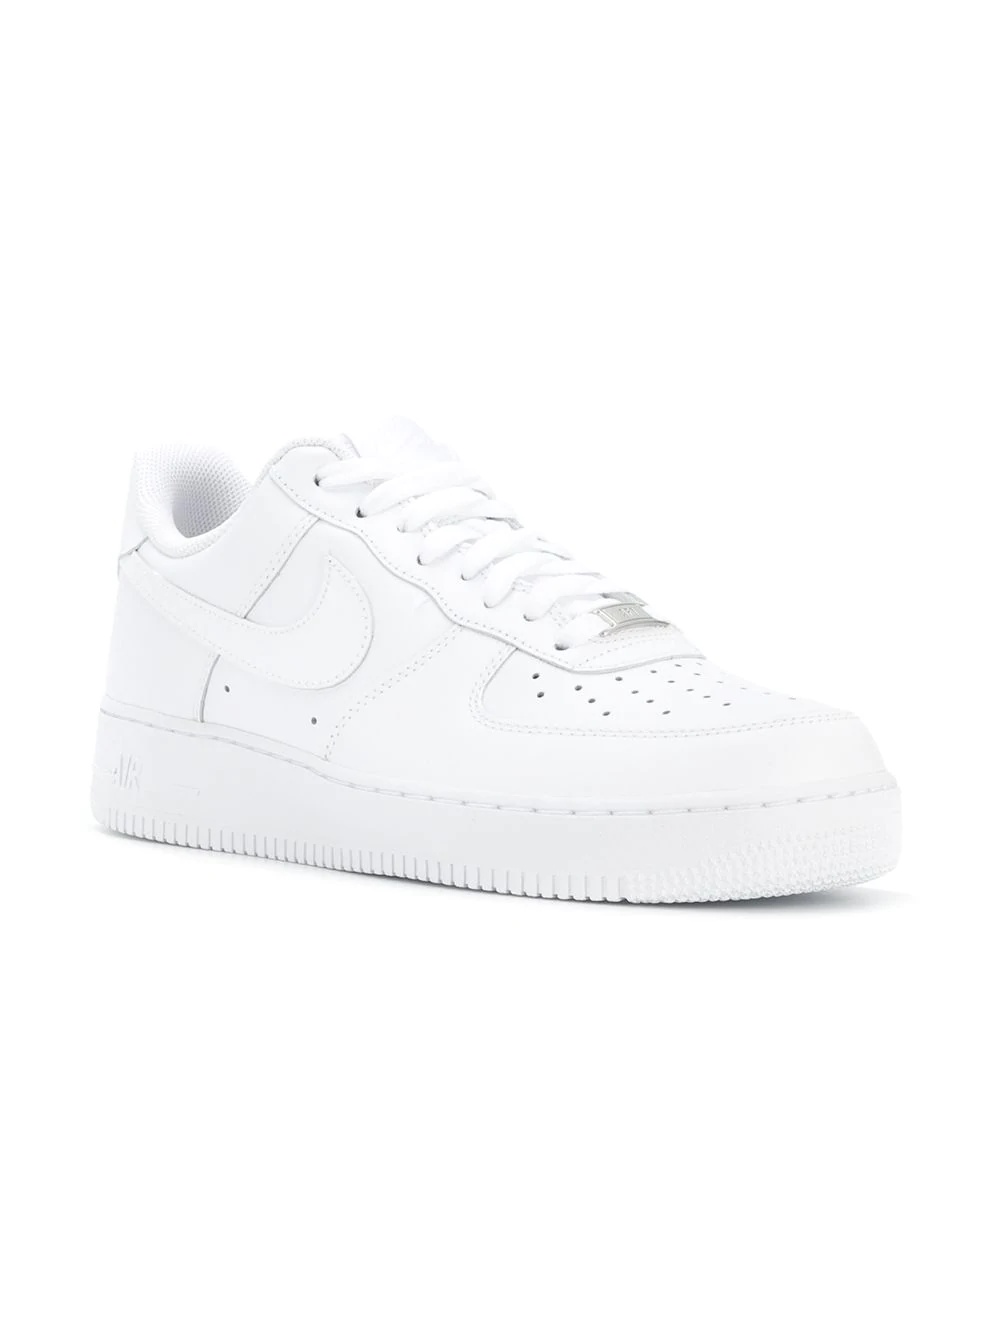 Air Force 1 Low 07 "White On White" sneakers - 2